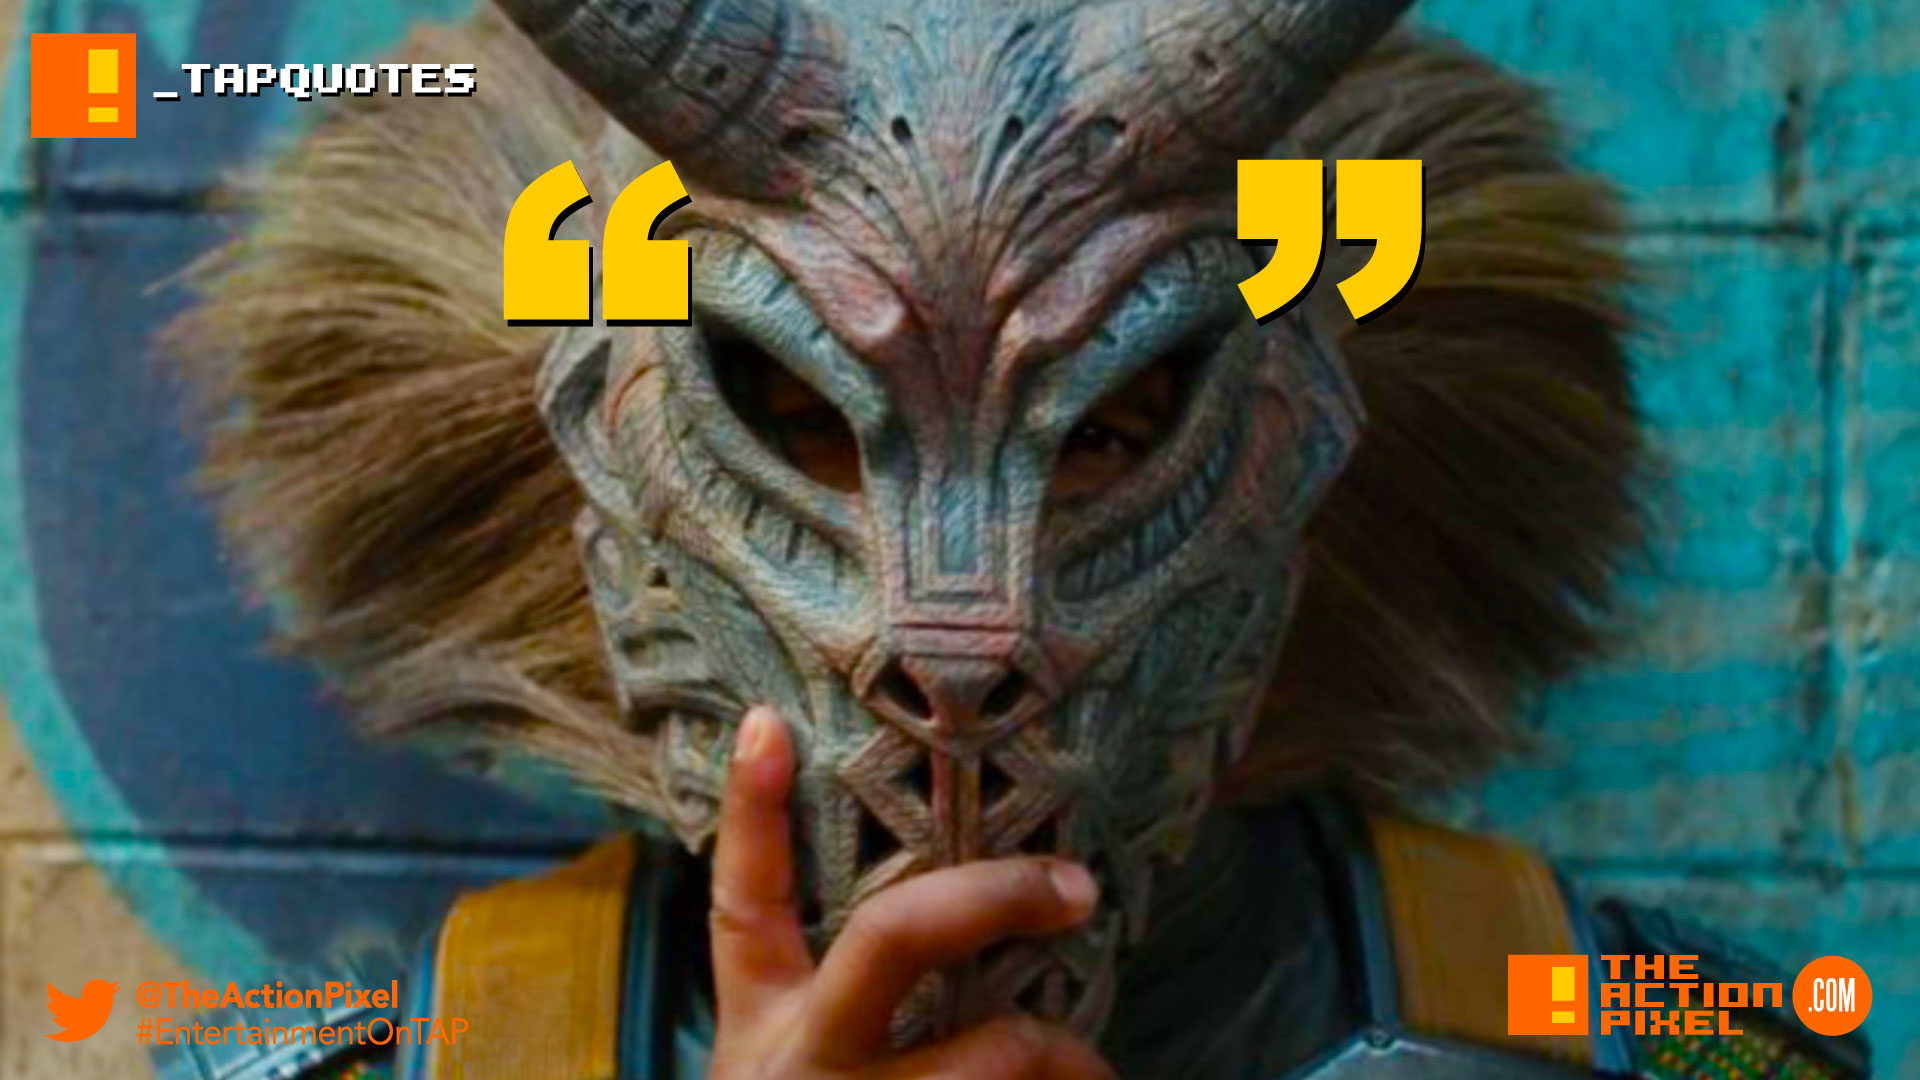 TAPQuotes, killmonger,w'kabi, michael b jordan, black panther, black panther movie, marvel studios, still, the action pixel, entertainment on tap,black panther,poster, black panther,marvel studios, marvel, comics, chadwick boseman, gritty, black panther, movie, entertainment on tap, sdcc, comic-con, poster art,official trailer, character posters,, promo,rise, marvel studios, marvel comics,Dora Milaje, ramonda, danai gurira, quote, comic book quote